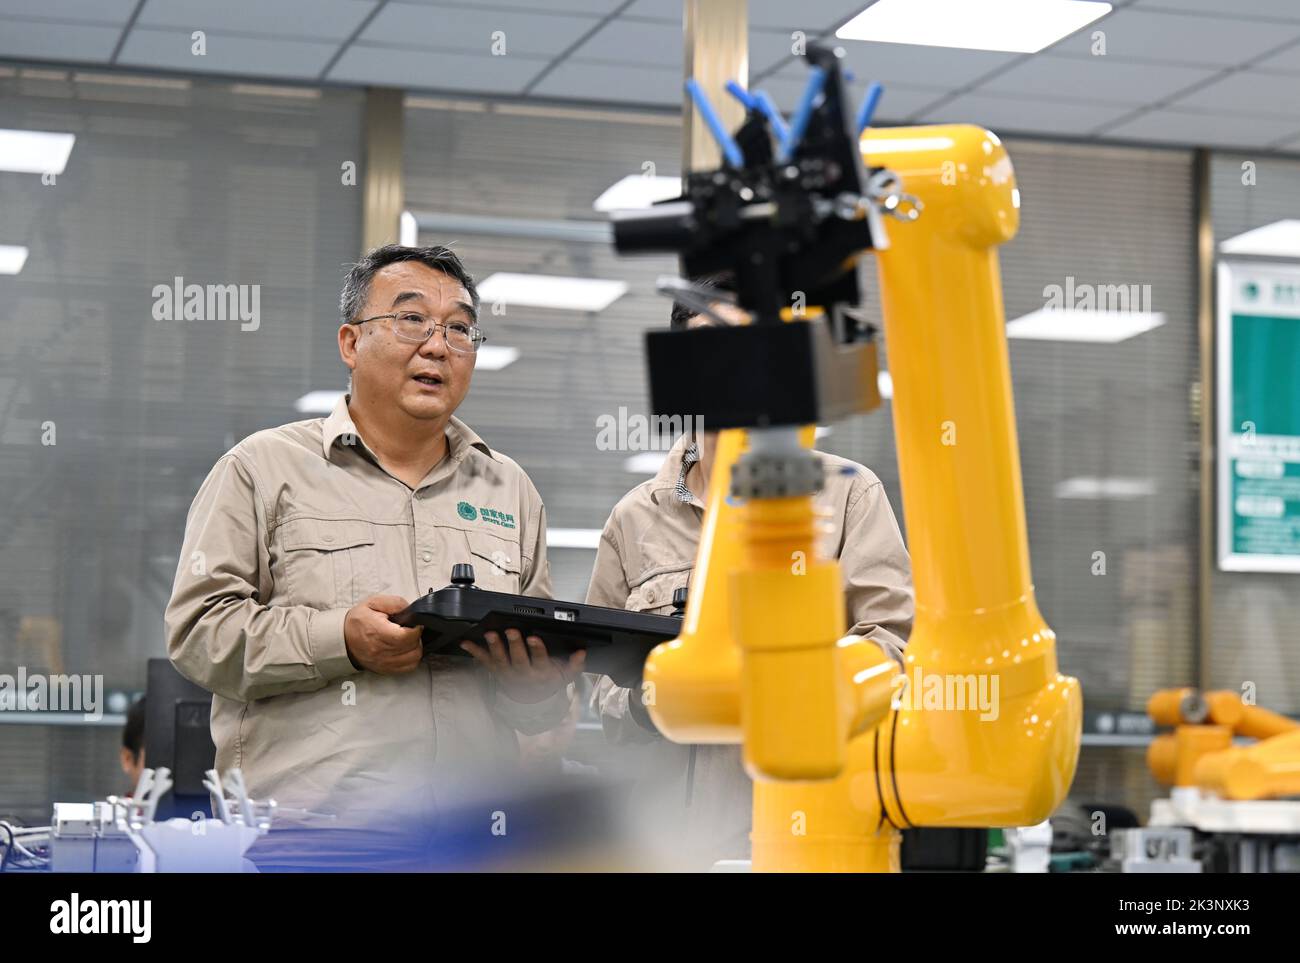 Tianjin. 8th Sep, 2022. Zhang Liming and his colleague adjust a fourth-generation robot in north China's Tianjin, Sept. 8, 2022. Zhang Liming, a delegate to the upcoming 20th National Congress of the Communist Party of China (CPC), is well-known for his innovative prowess. TO GO WITH 'Profile: A CPC national congress delegate pursuing innovation' Credit: Zhao Zishuo/Xinhua/Alamy Live News Stock Photo